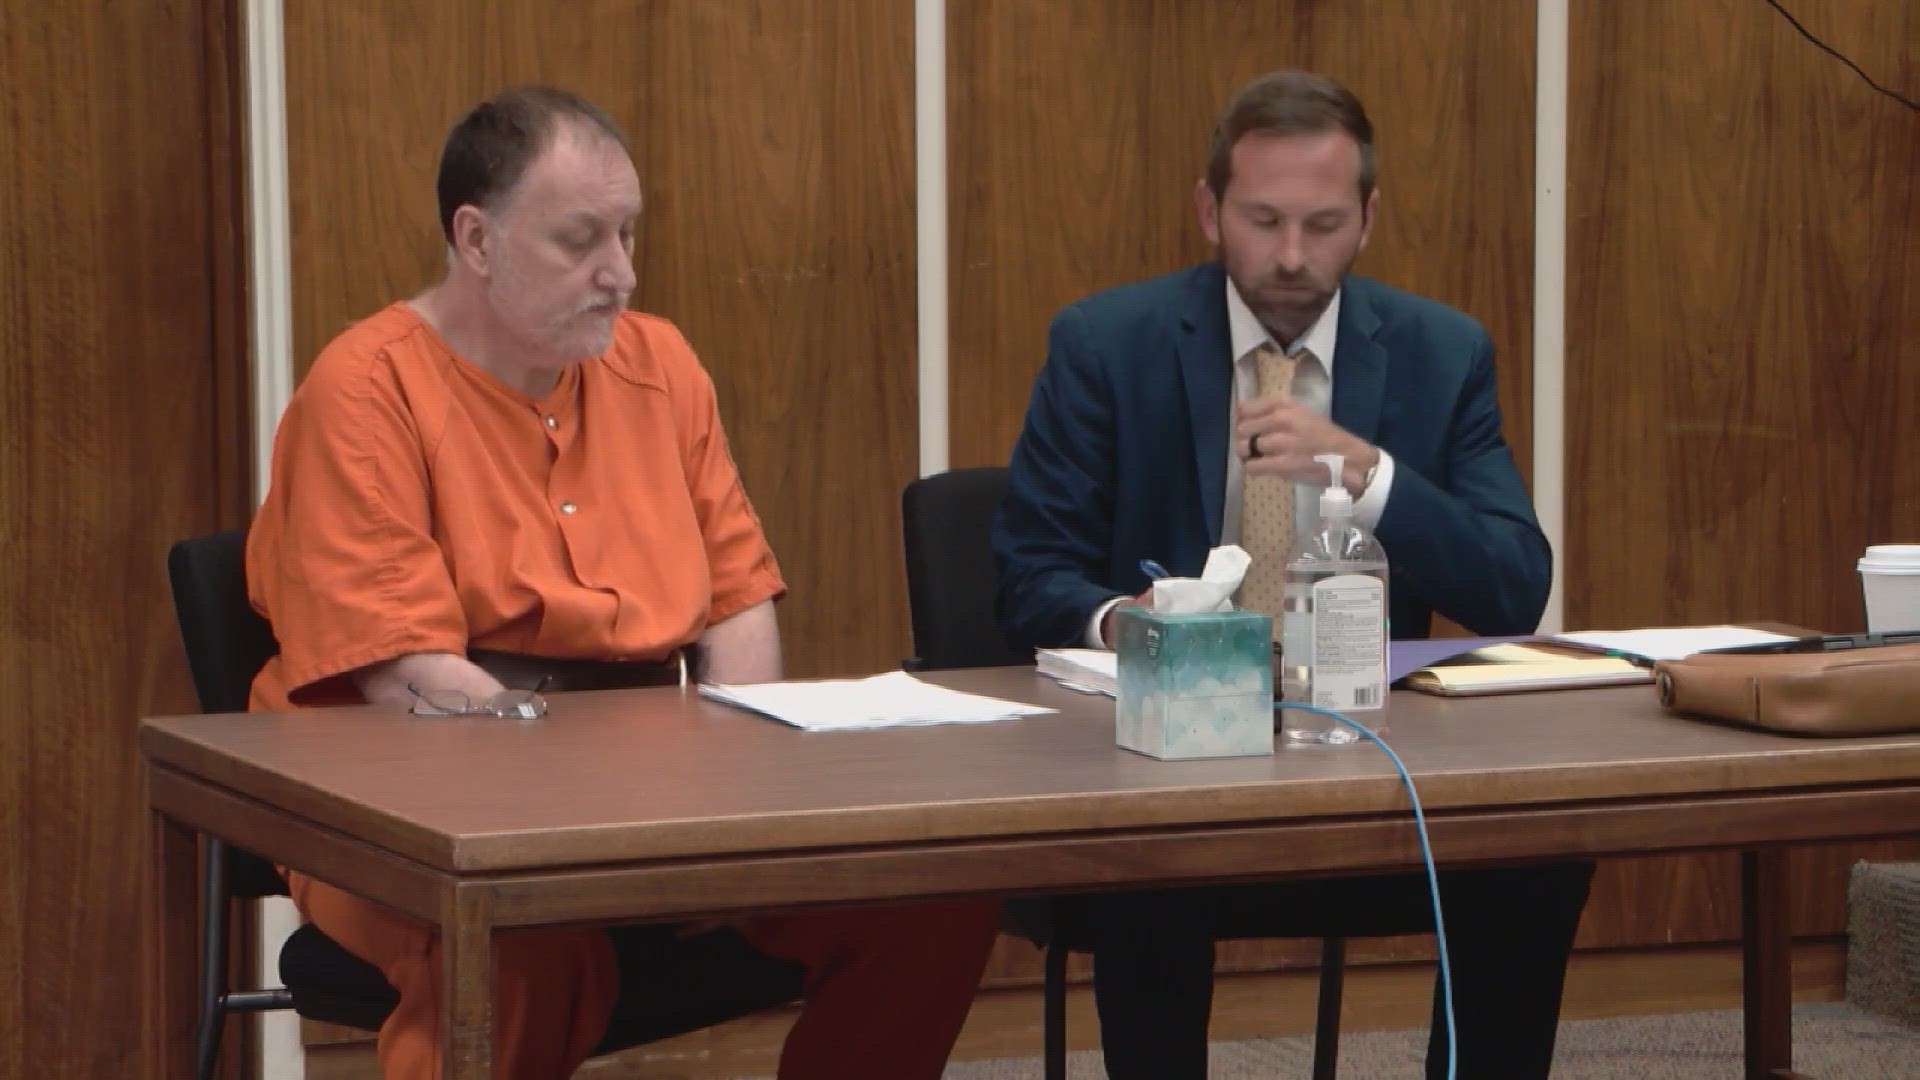 Randy Lankford changed his plea to guilty on Friday after dozens of decomposing bodies were found inside the Jeffersonville funeral home months ago.